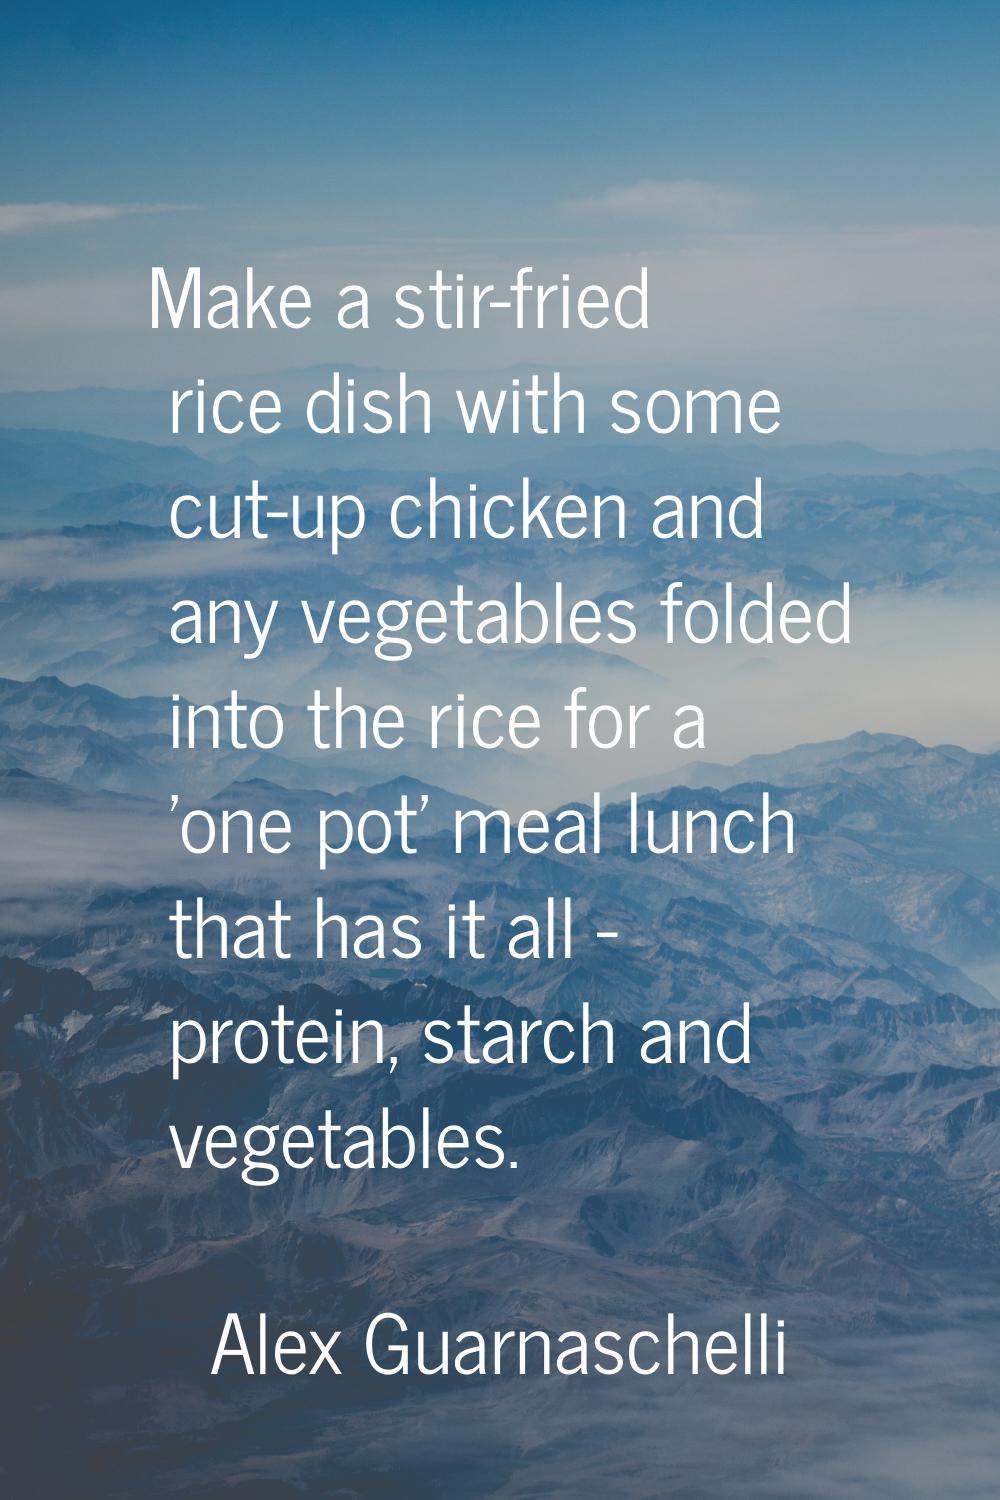 Make a stir-fried rice dish with some cut-up chicken and any vegetables folded into the rice for a 